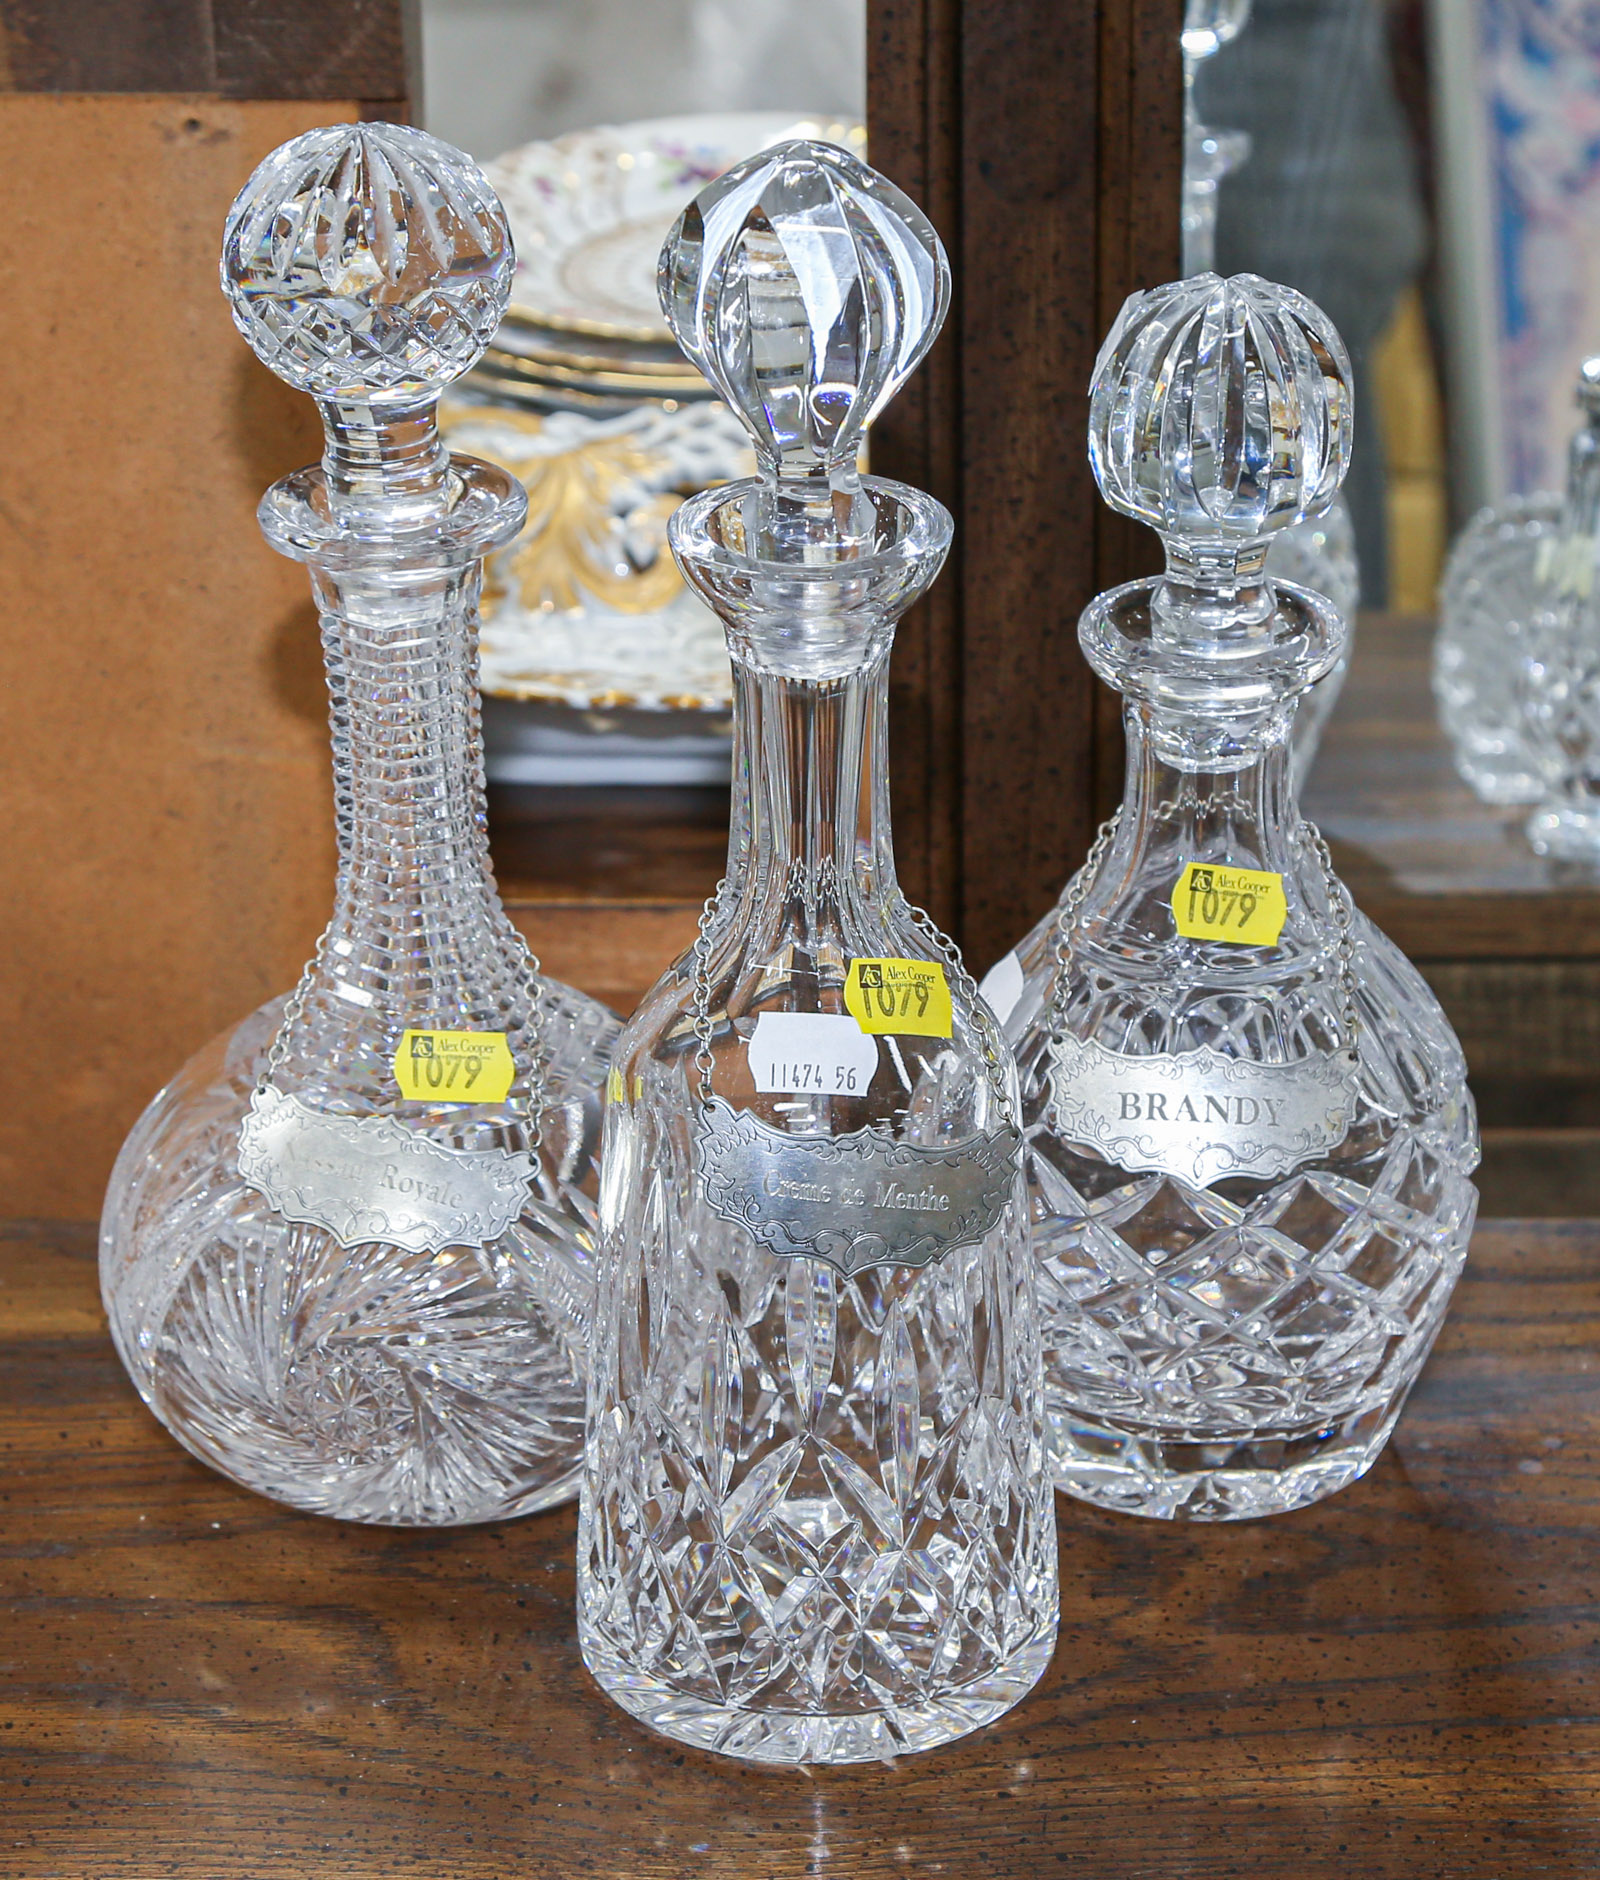 THREE WATERFORD DECANTERS 11 to